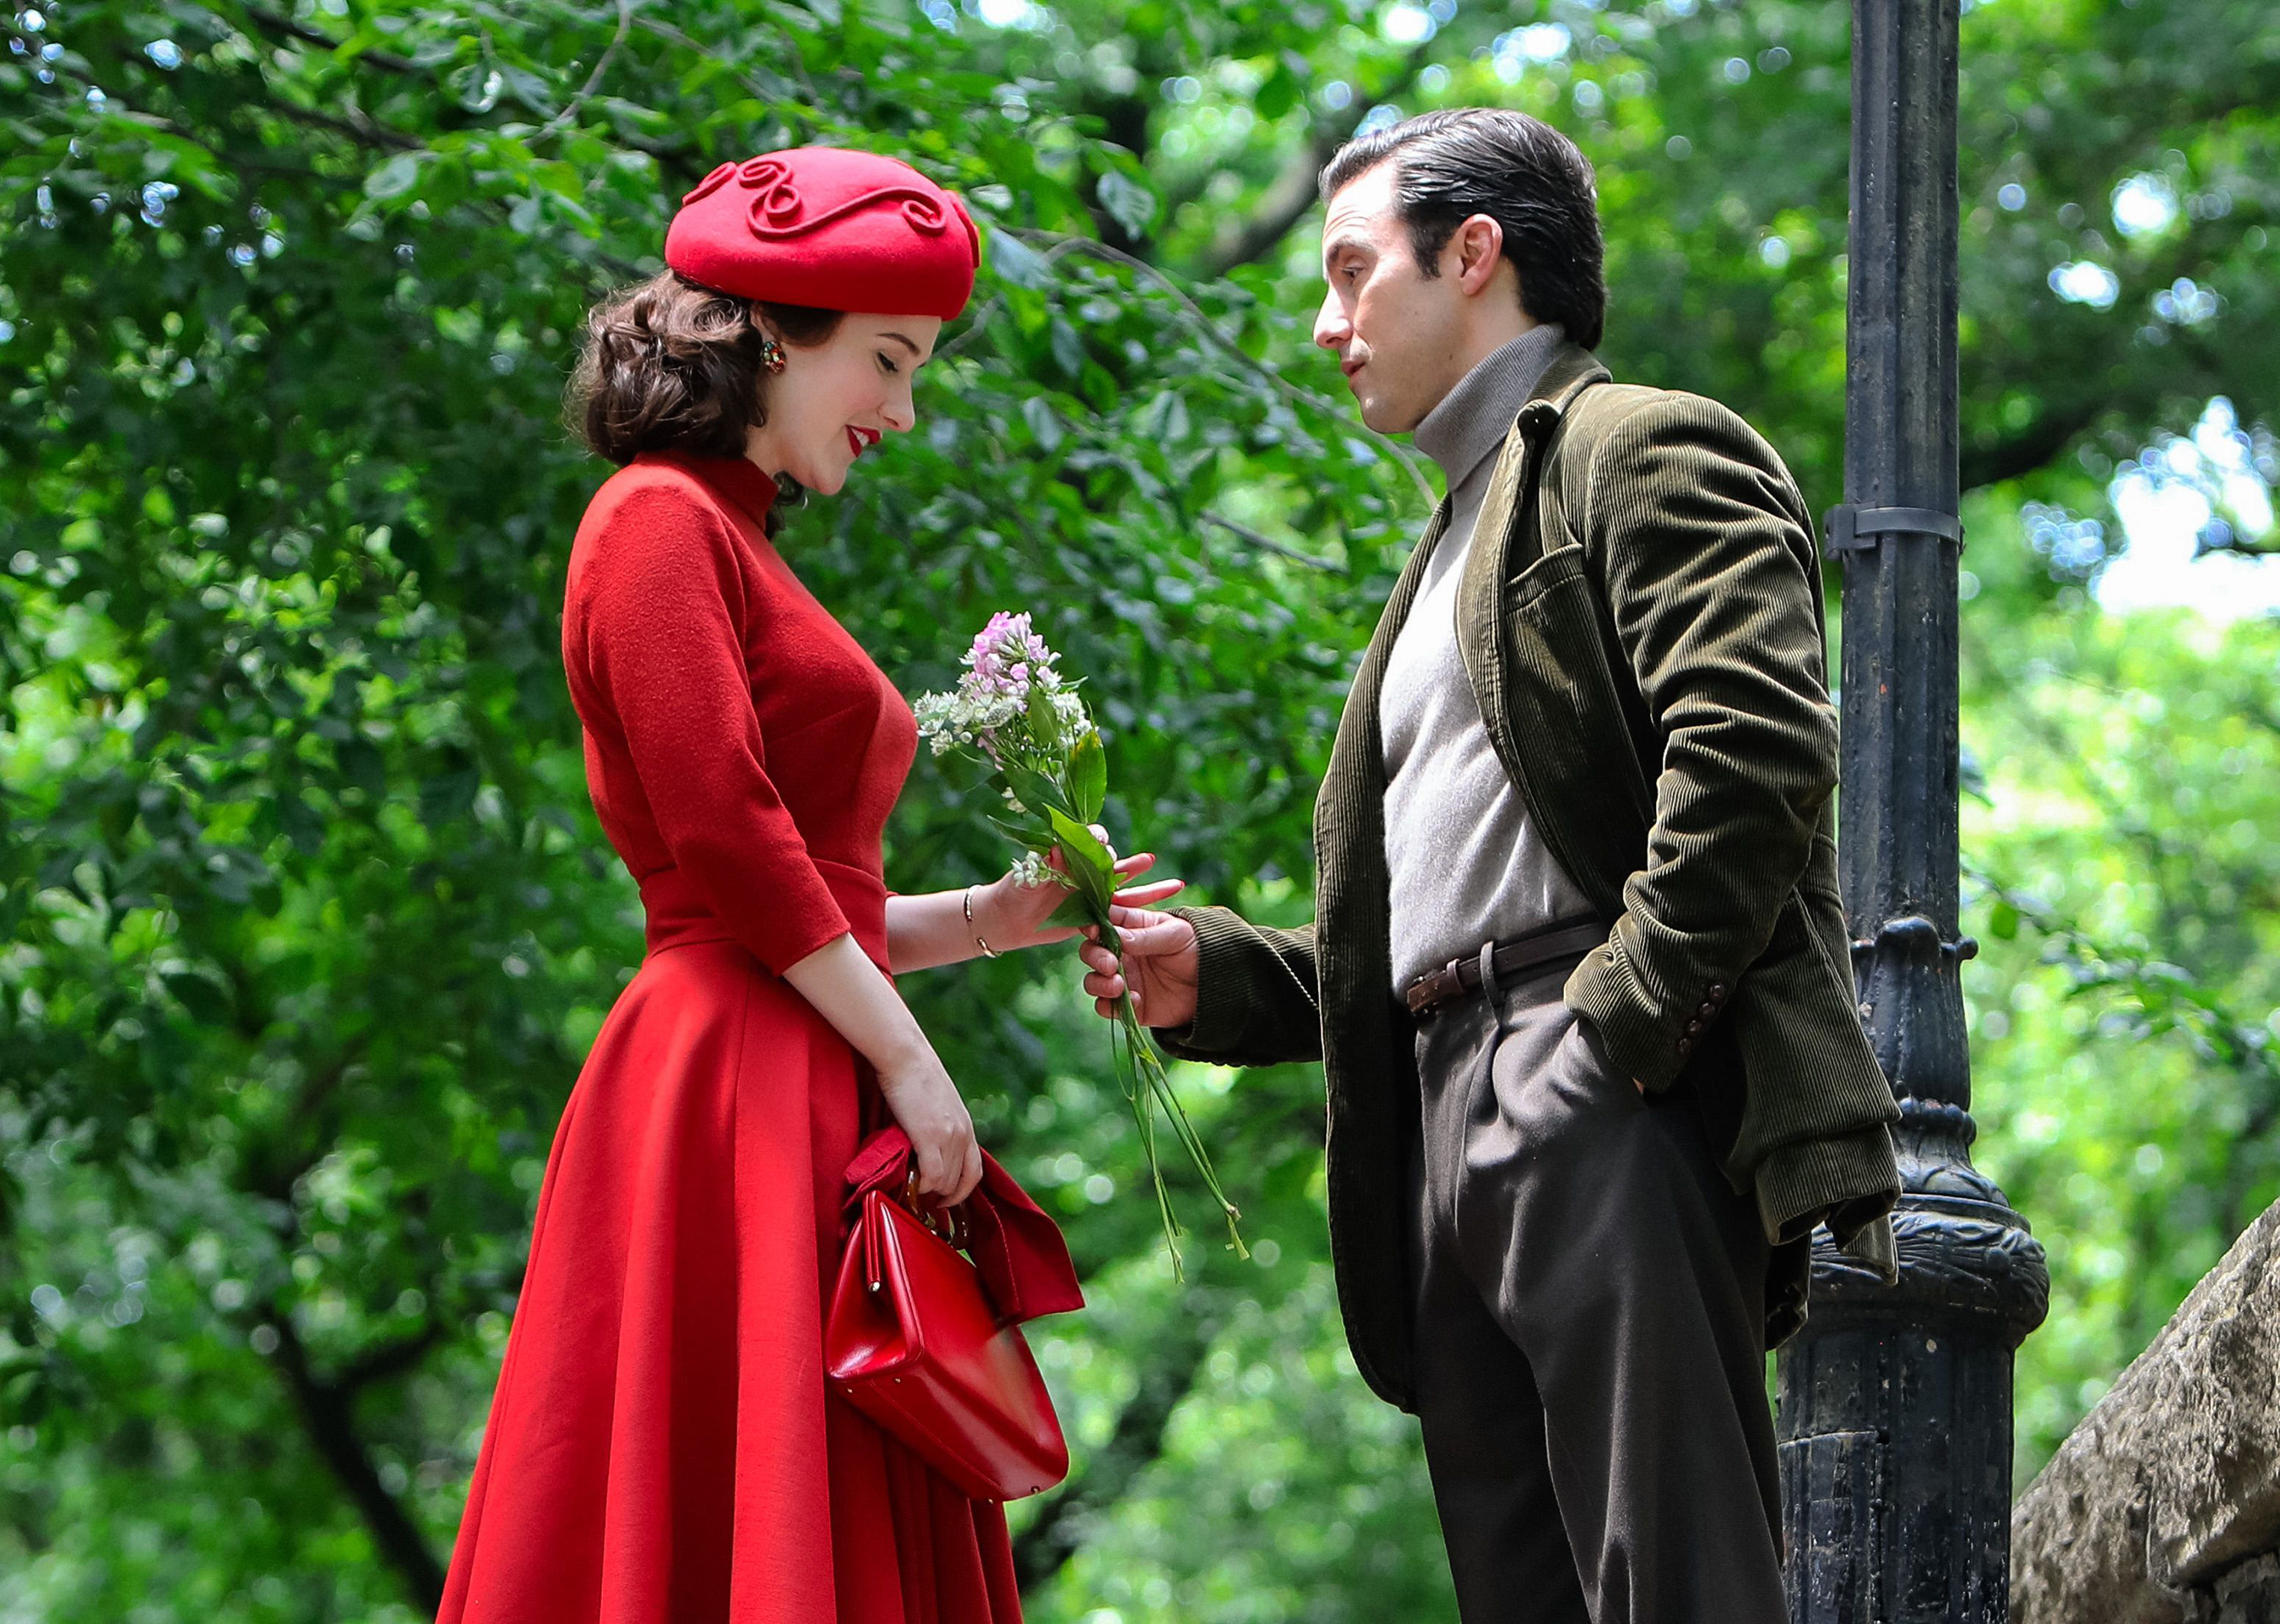 Rachel Brosnahan and Milo Ventimiglia in “The Marvelous Mrs. Maisel”